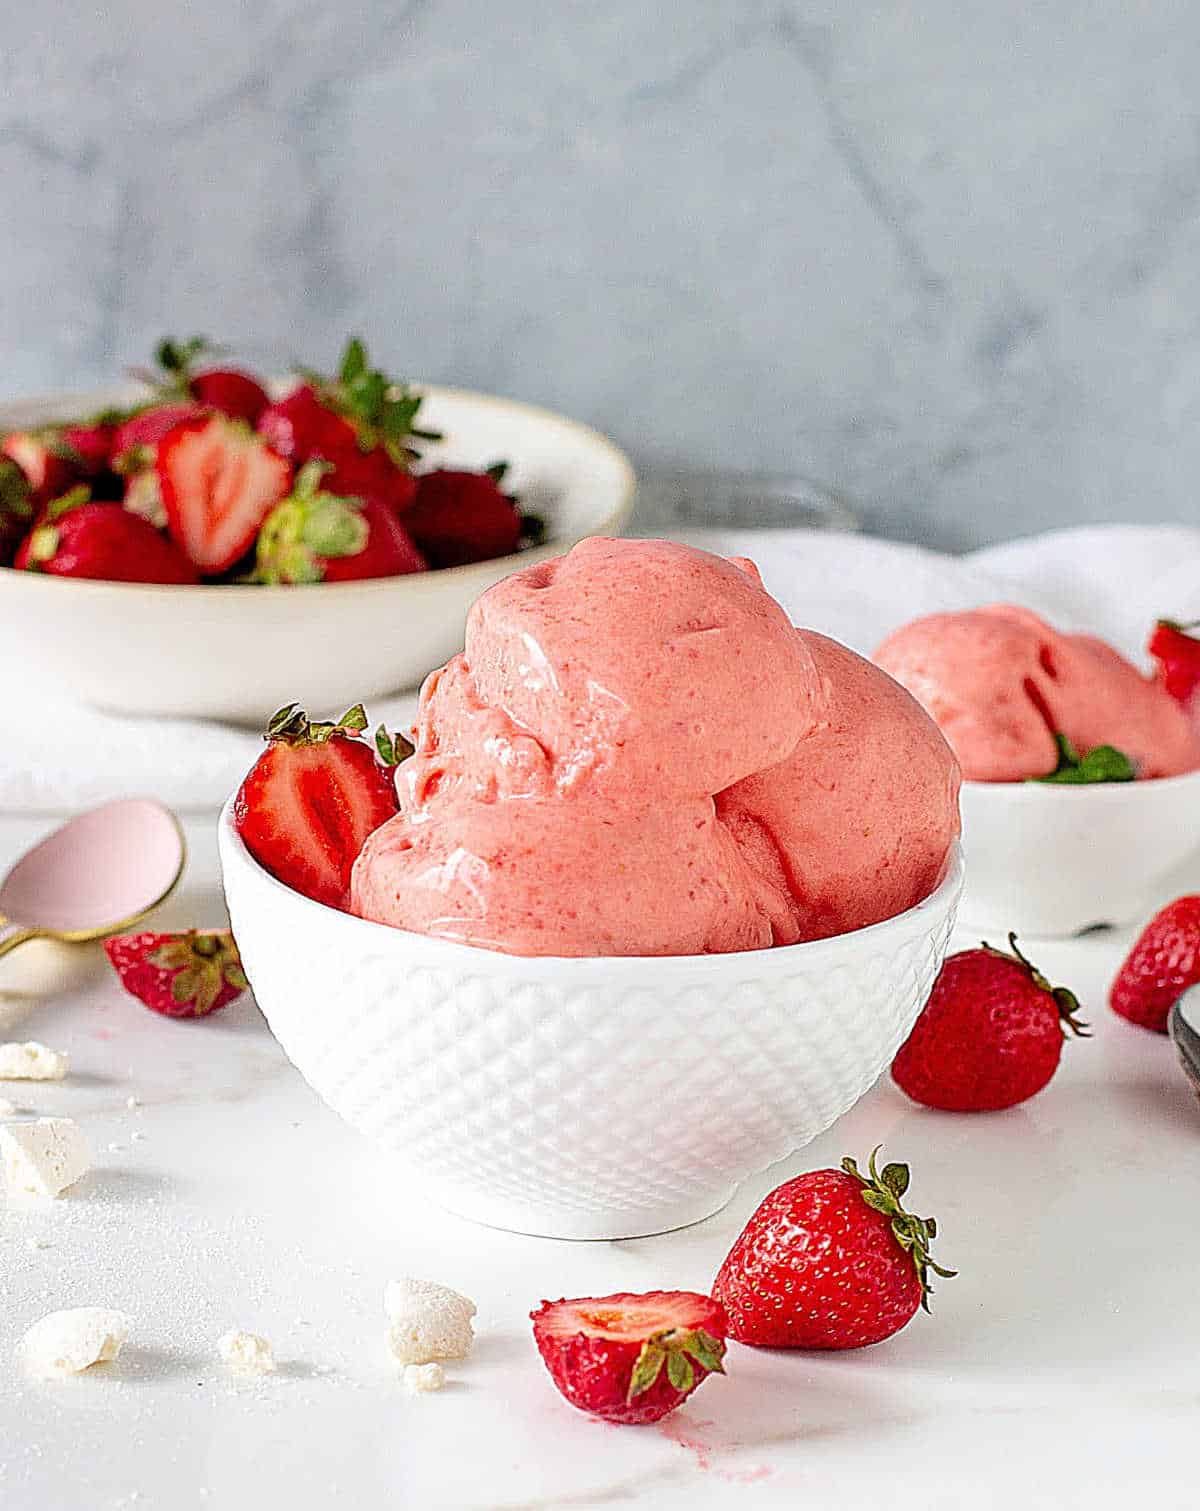 Several scoops of strawberry ice cream in white bowl, more strawberries around, white surface, grey background.